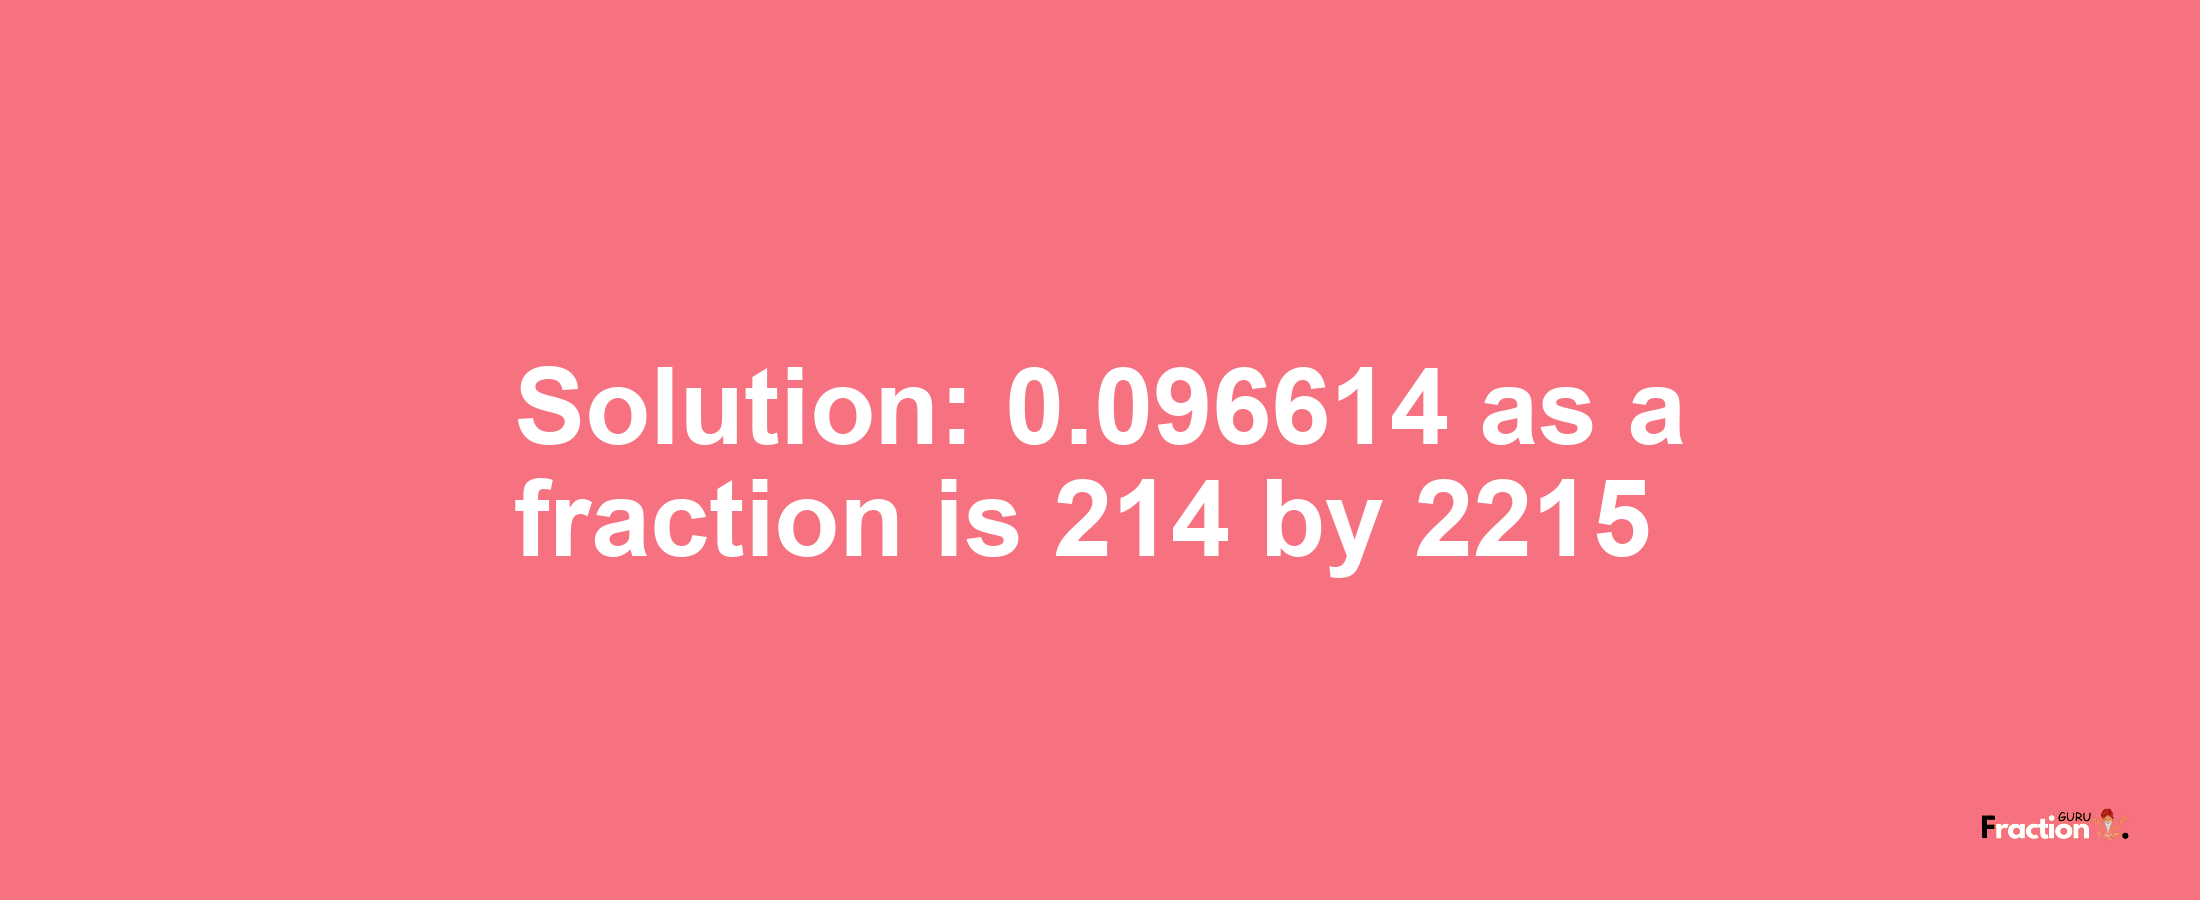 Solution:0.096614 as a fraction is 214/2215